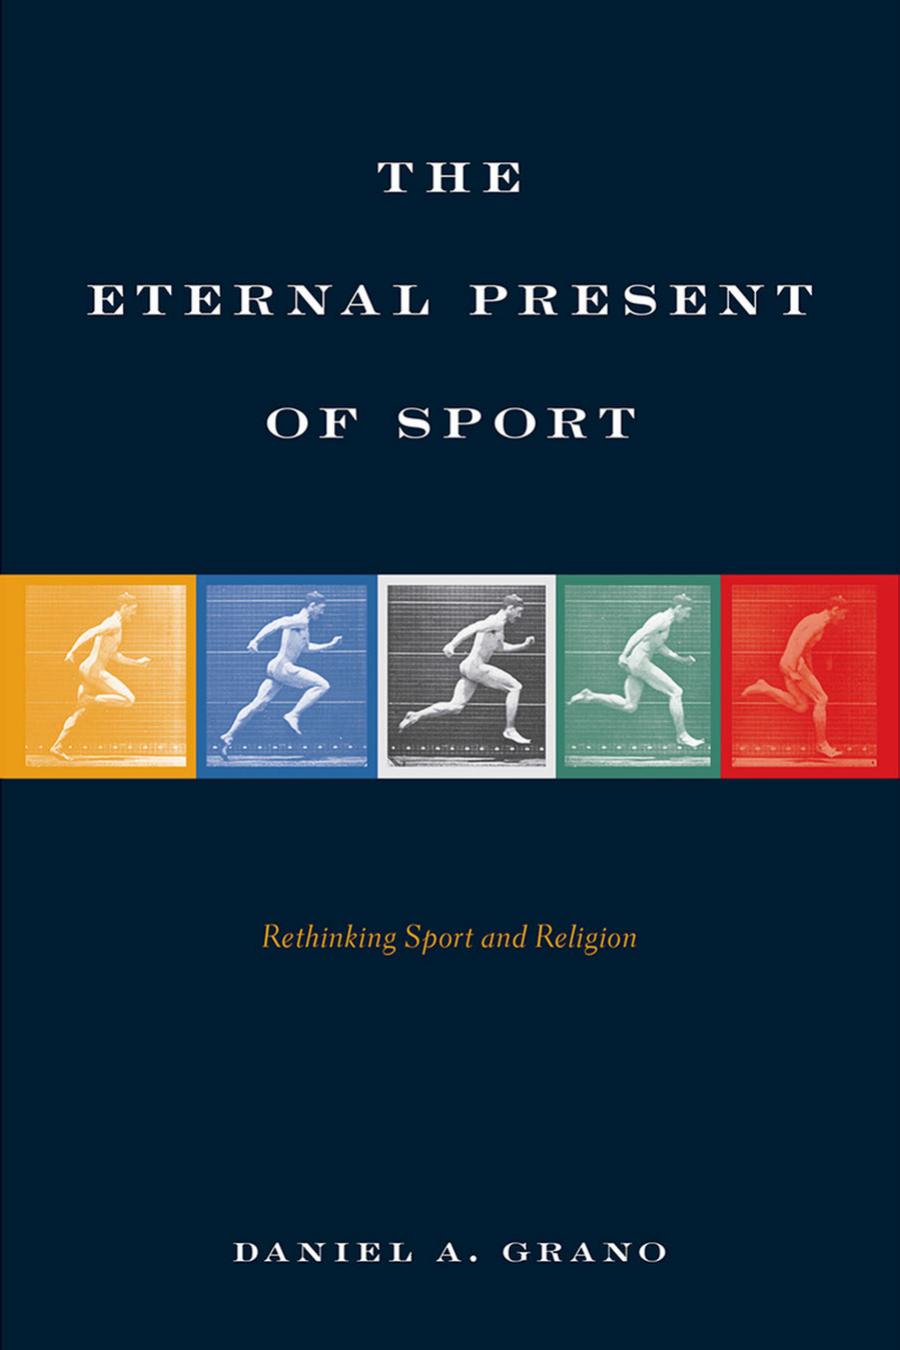 The Eternal Present of Sport: Rethinking Sport and Religion by Daniel A. Grano